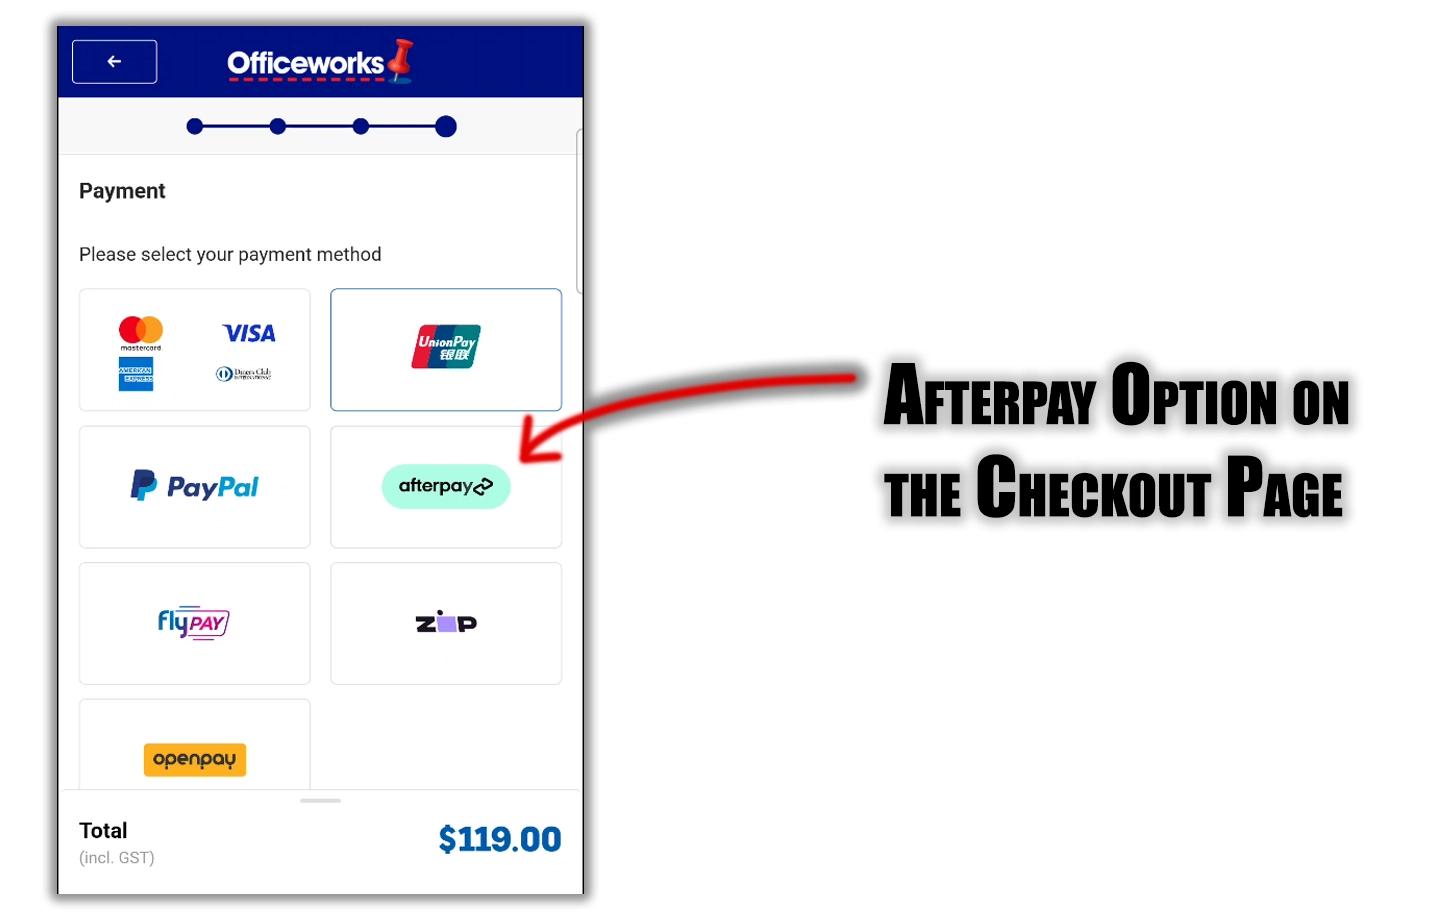 Afterpay Option on the Checkout Page